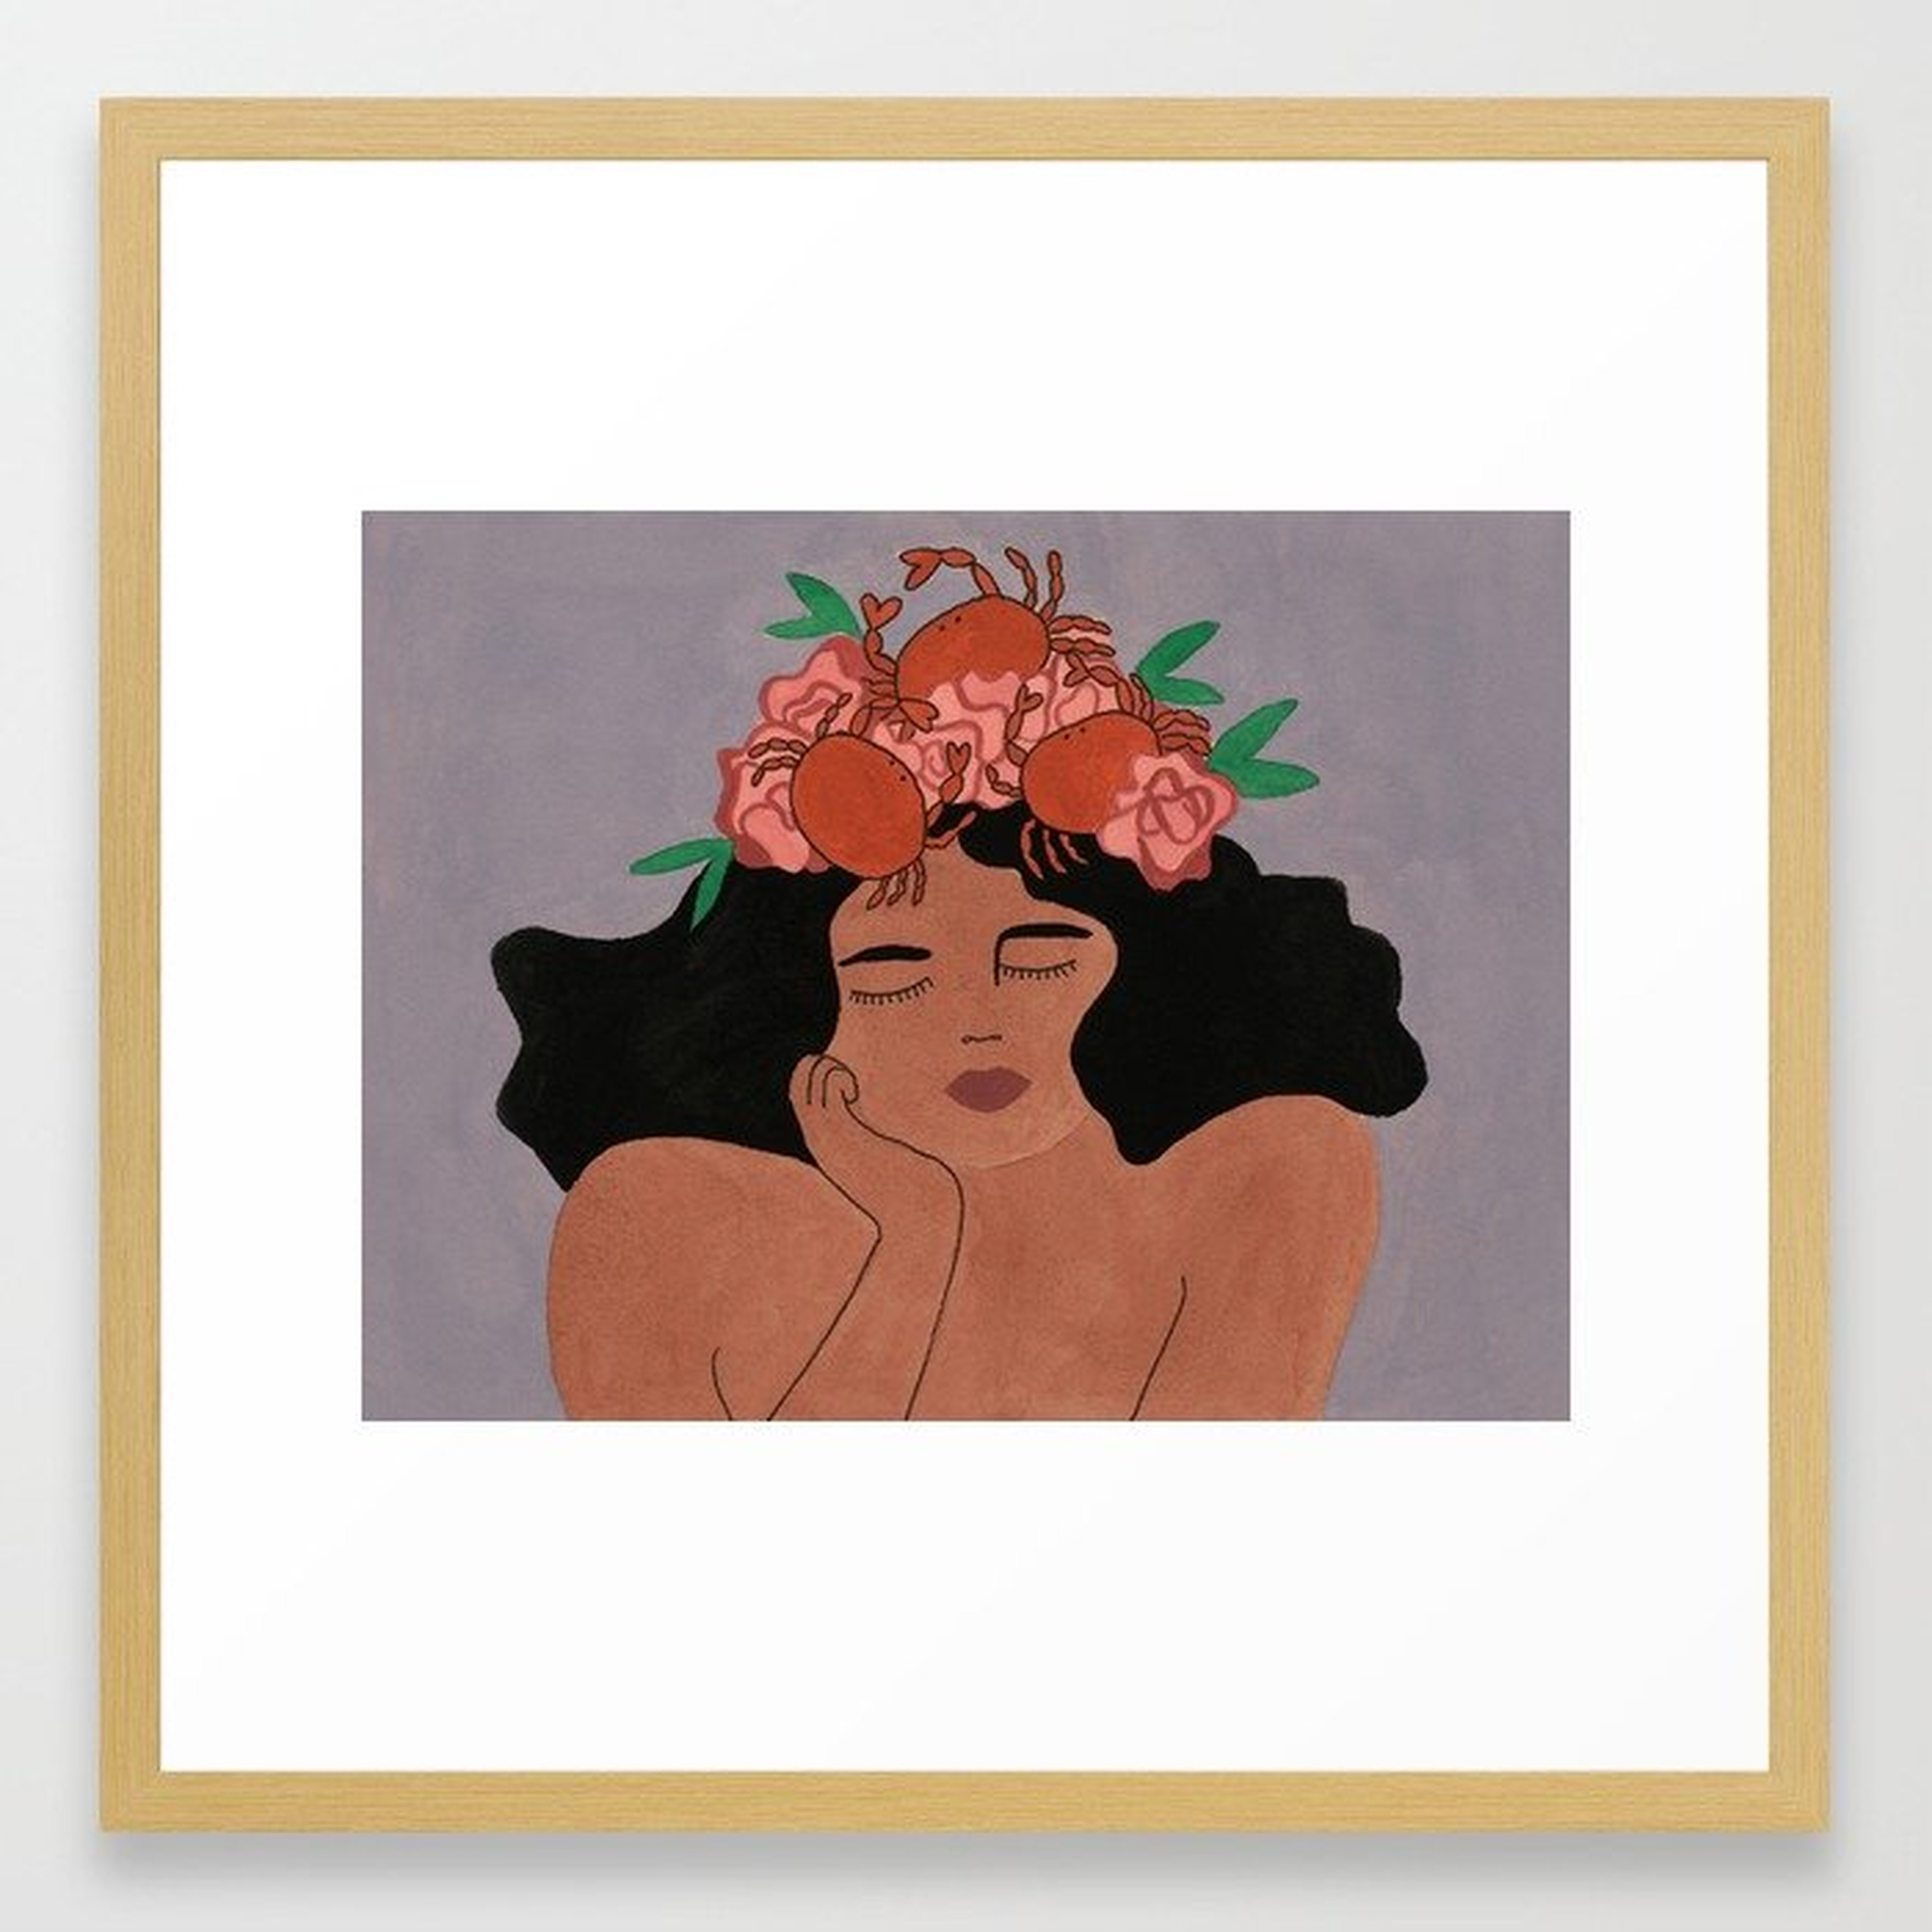 Cancer - For Marie Claire France January 2018 Framed Art Print - Society6